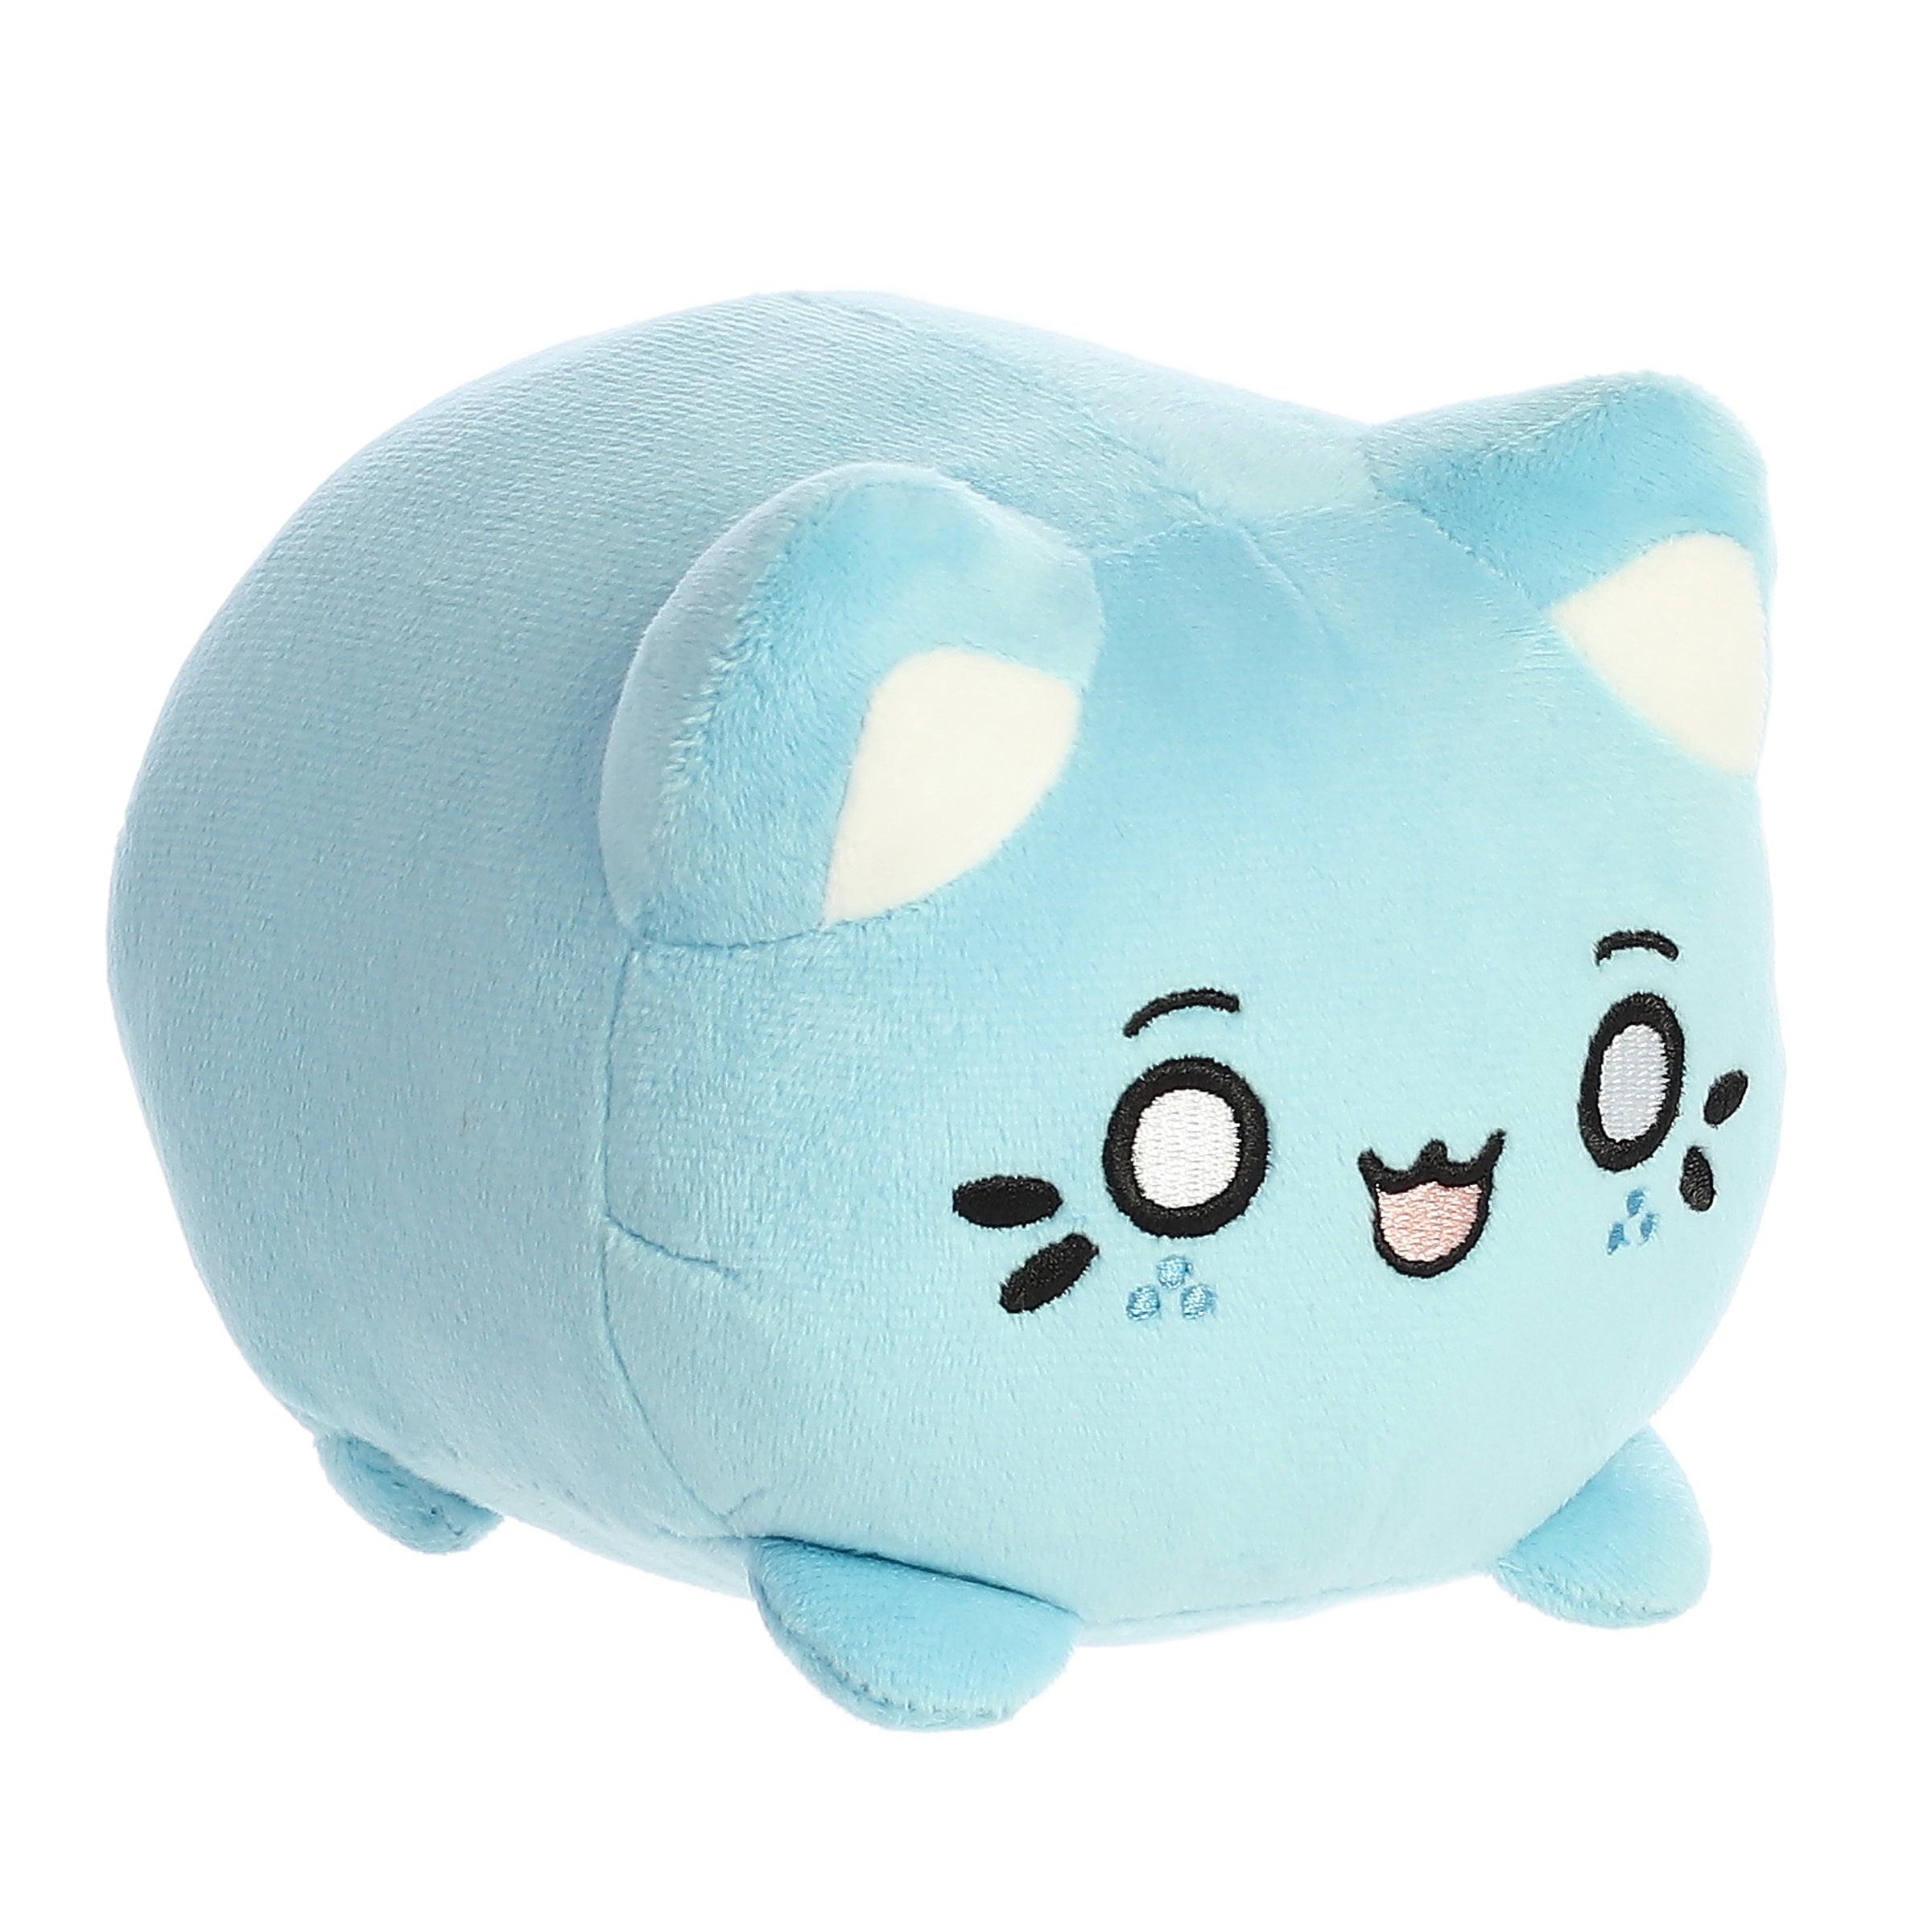 A light blue Tasty Peach Meowchi plush that is a round cylinder shape with the resemblance of an animated happy cat.